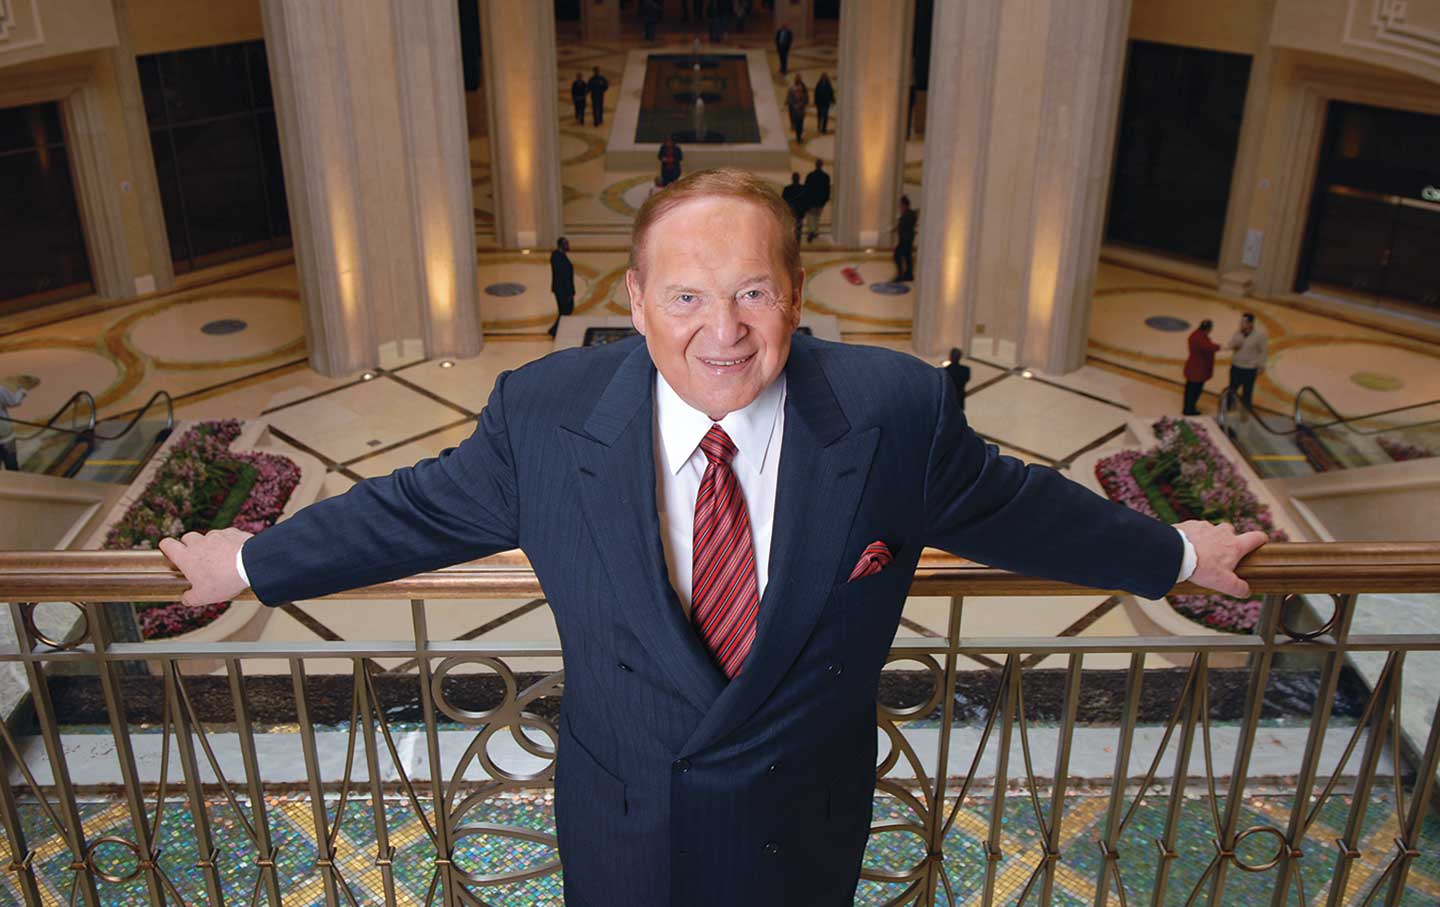 Even in Death, Sheldon Adelson Will Keep Undermining Democracy